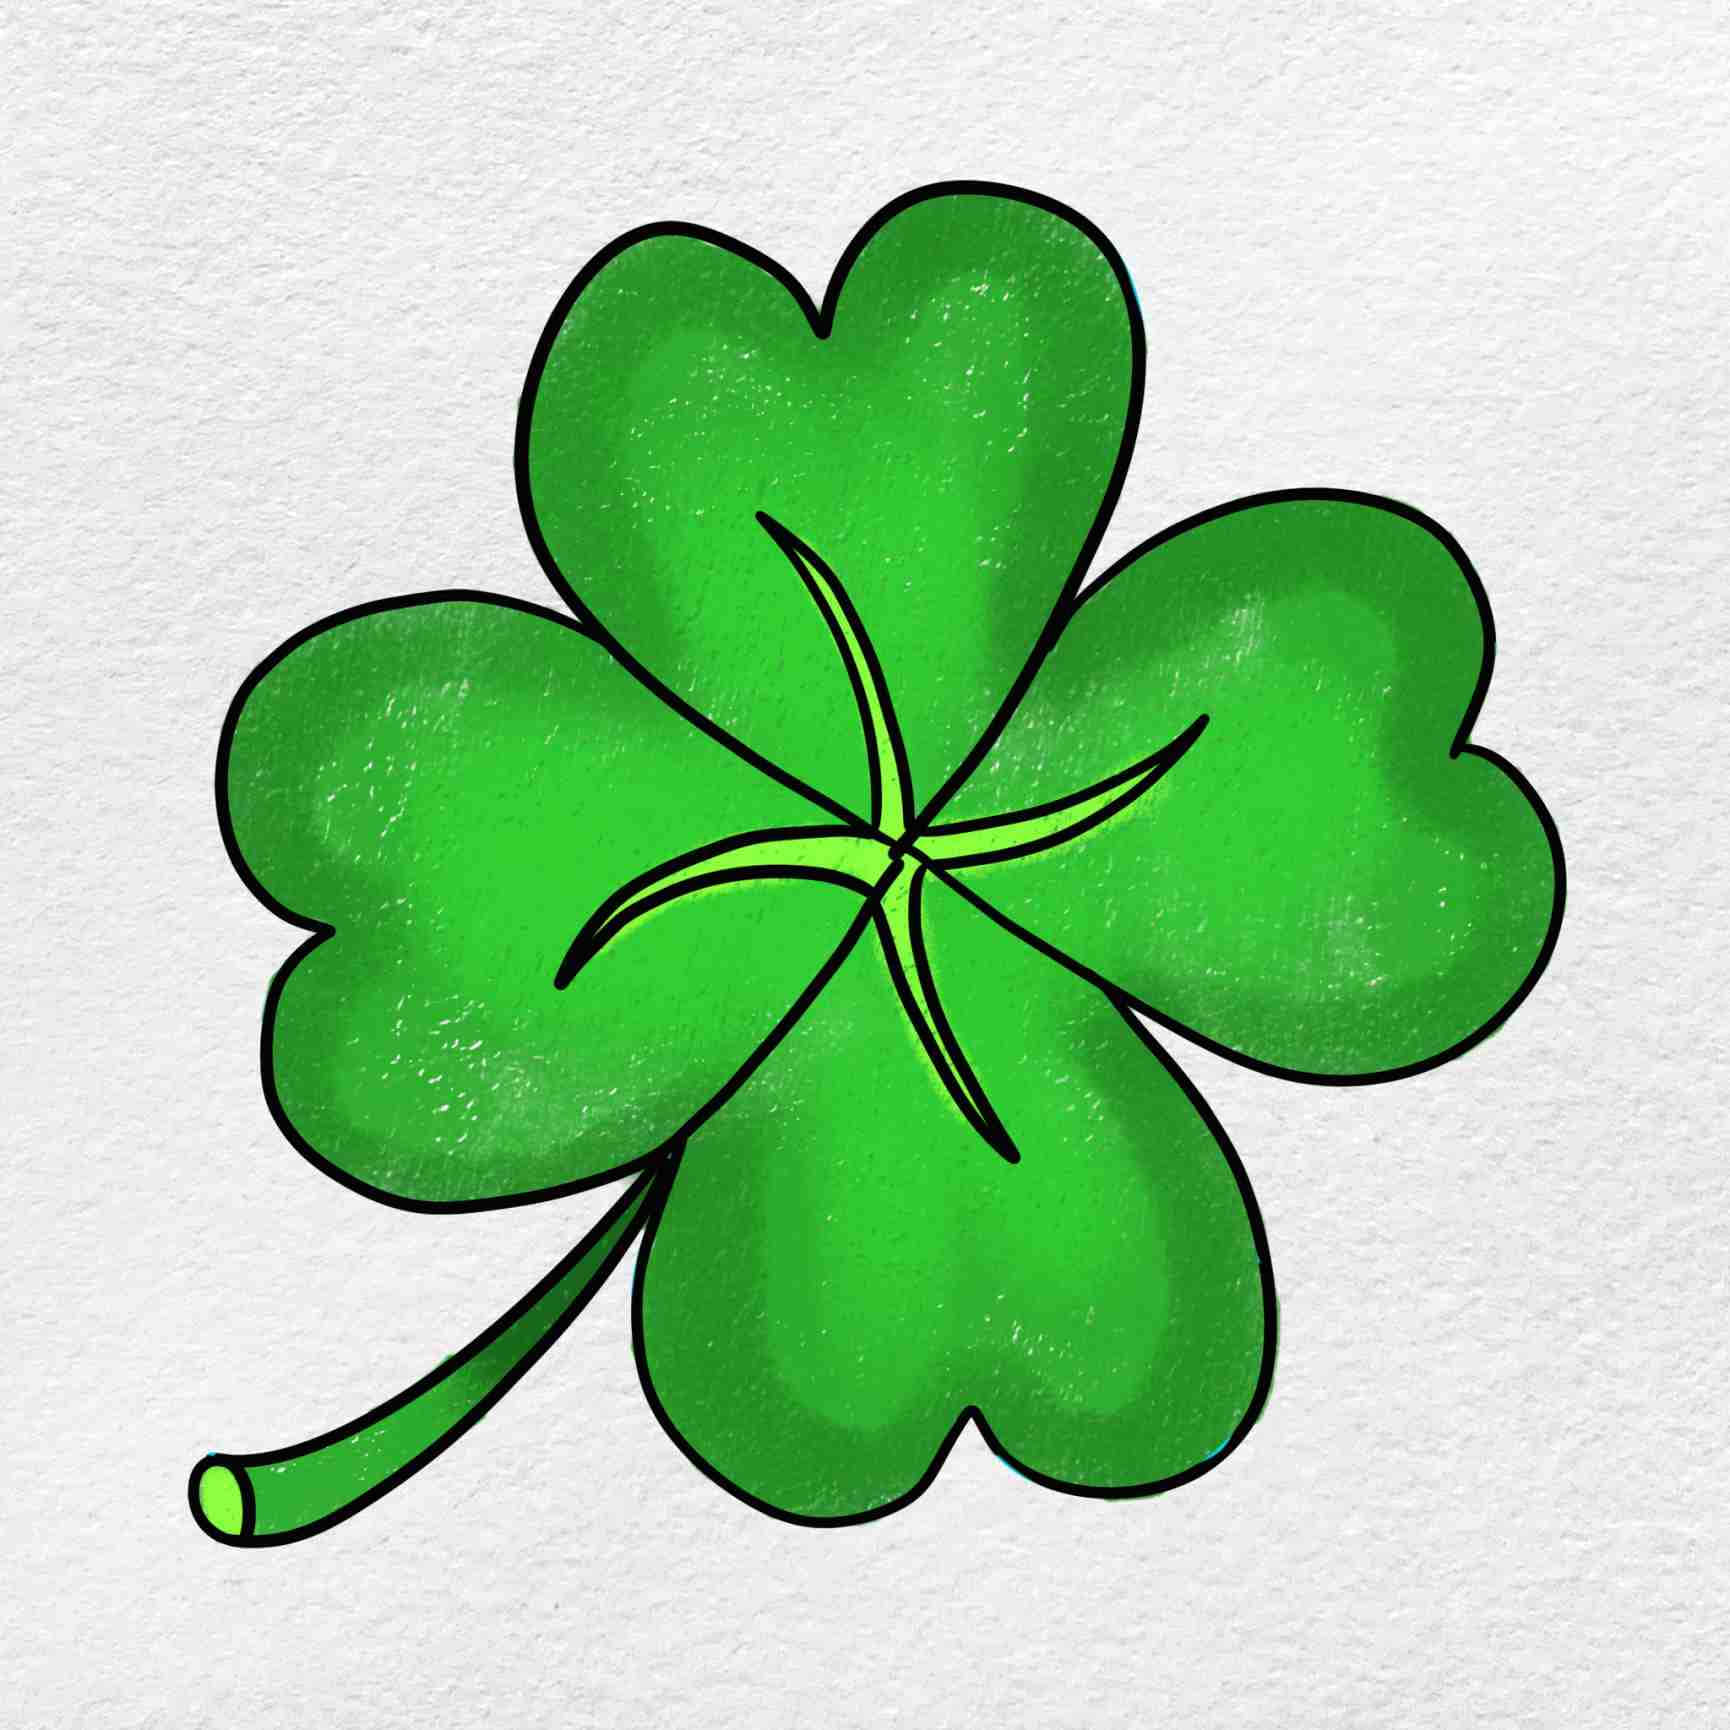 Four Leaf Clover Pencil Drawing Art Picture